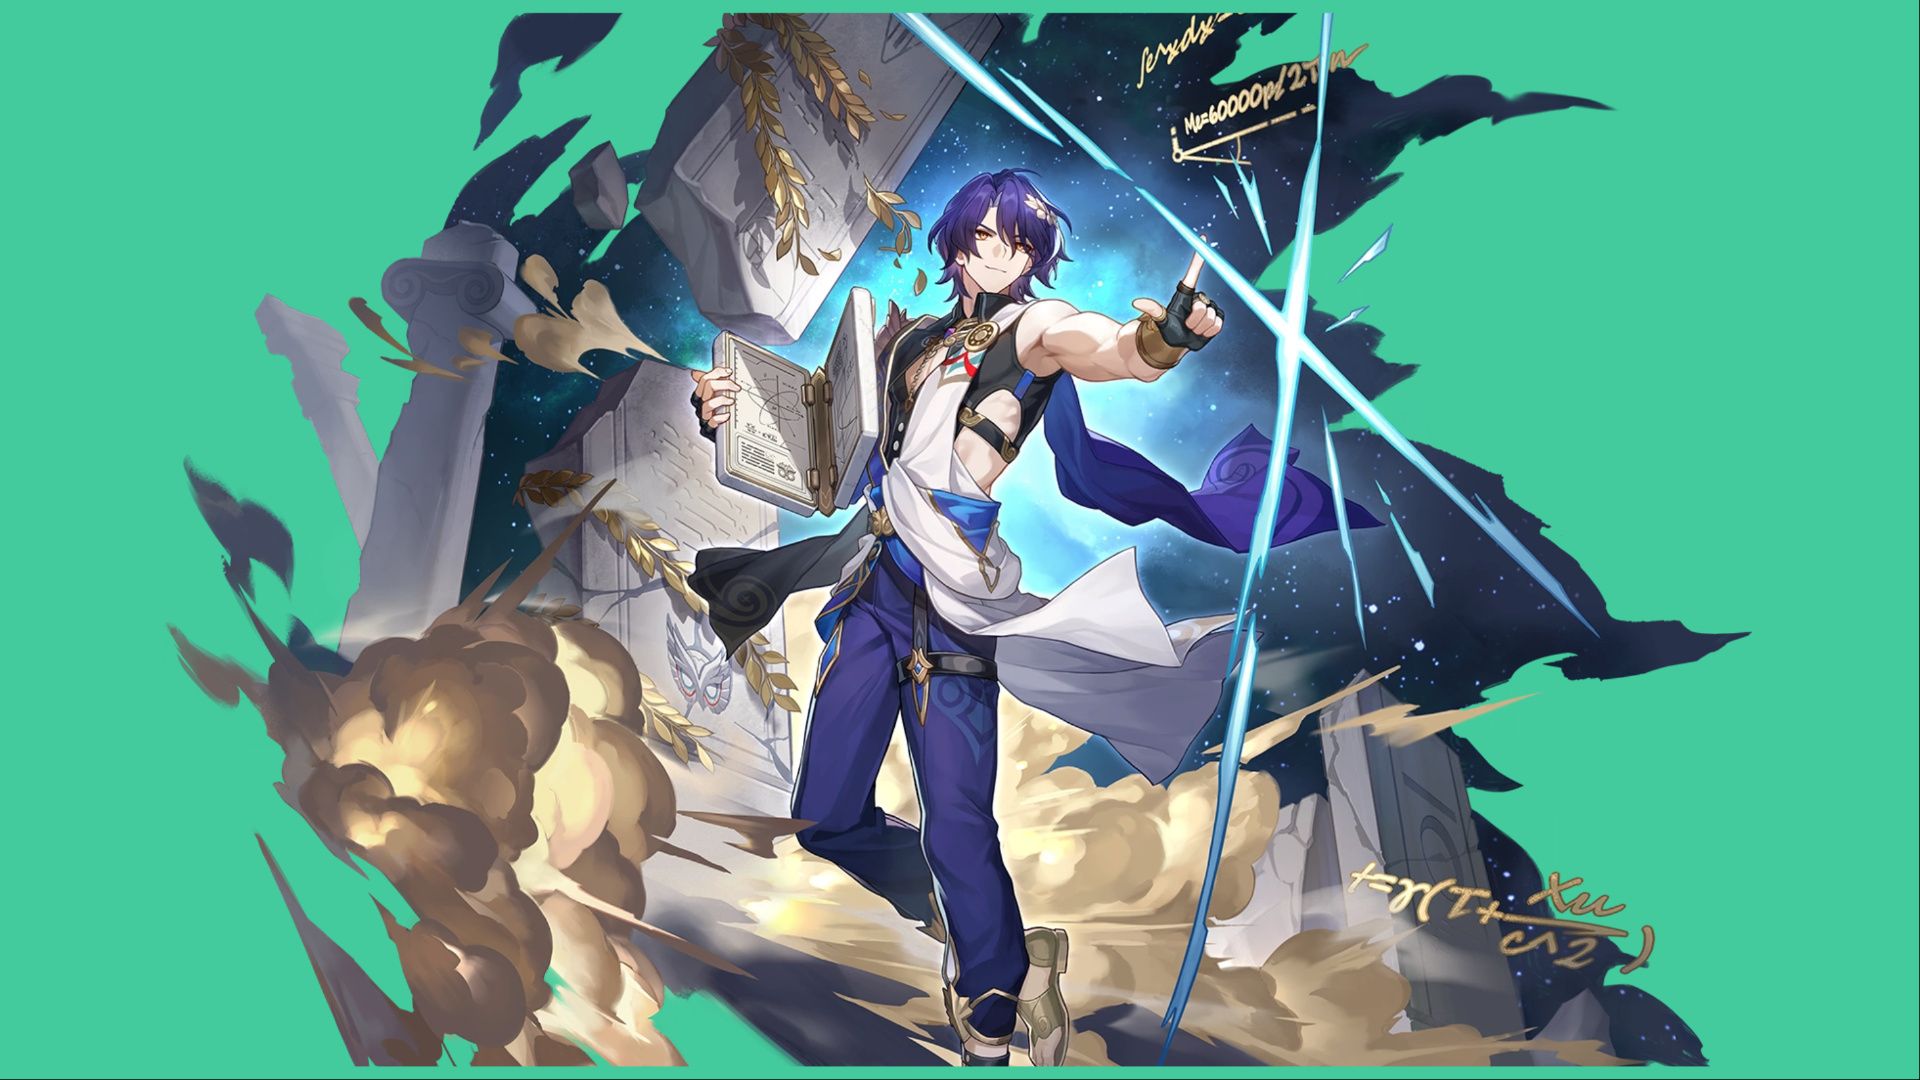 feature image for our honkai star rail dr ratio tier list, the image features dr ratio's splash art as he points ahead and holds an open book in his other hand, he is surrounded by broken pillars and stone structures with smoke and dust as a starry galaxy shines in the background